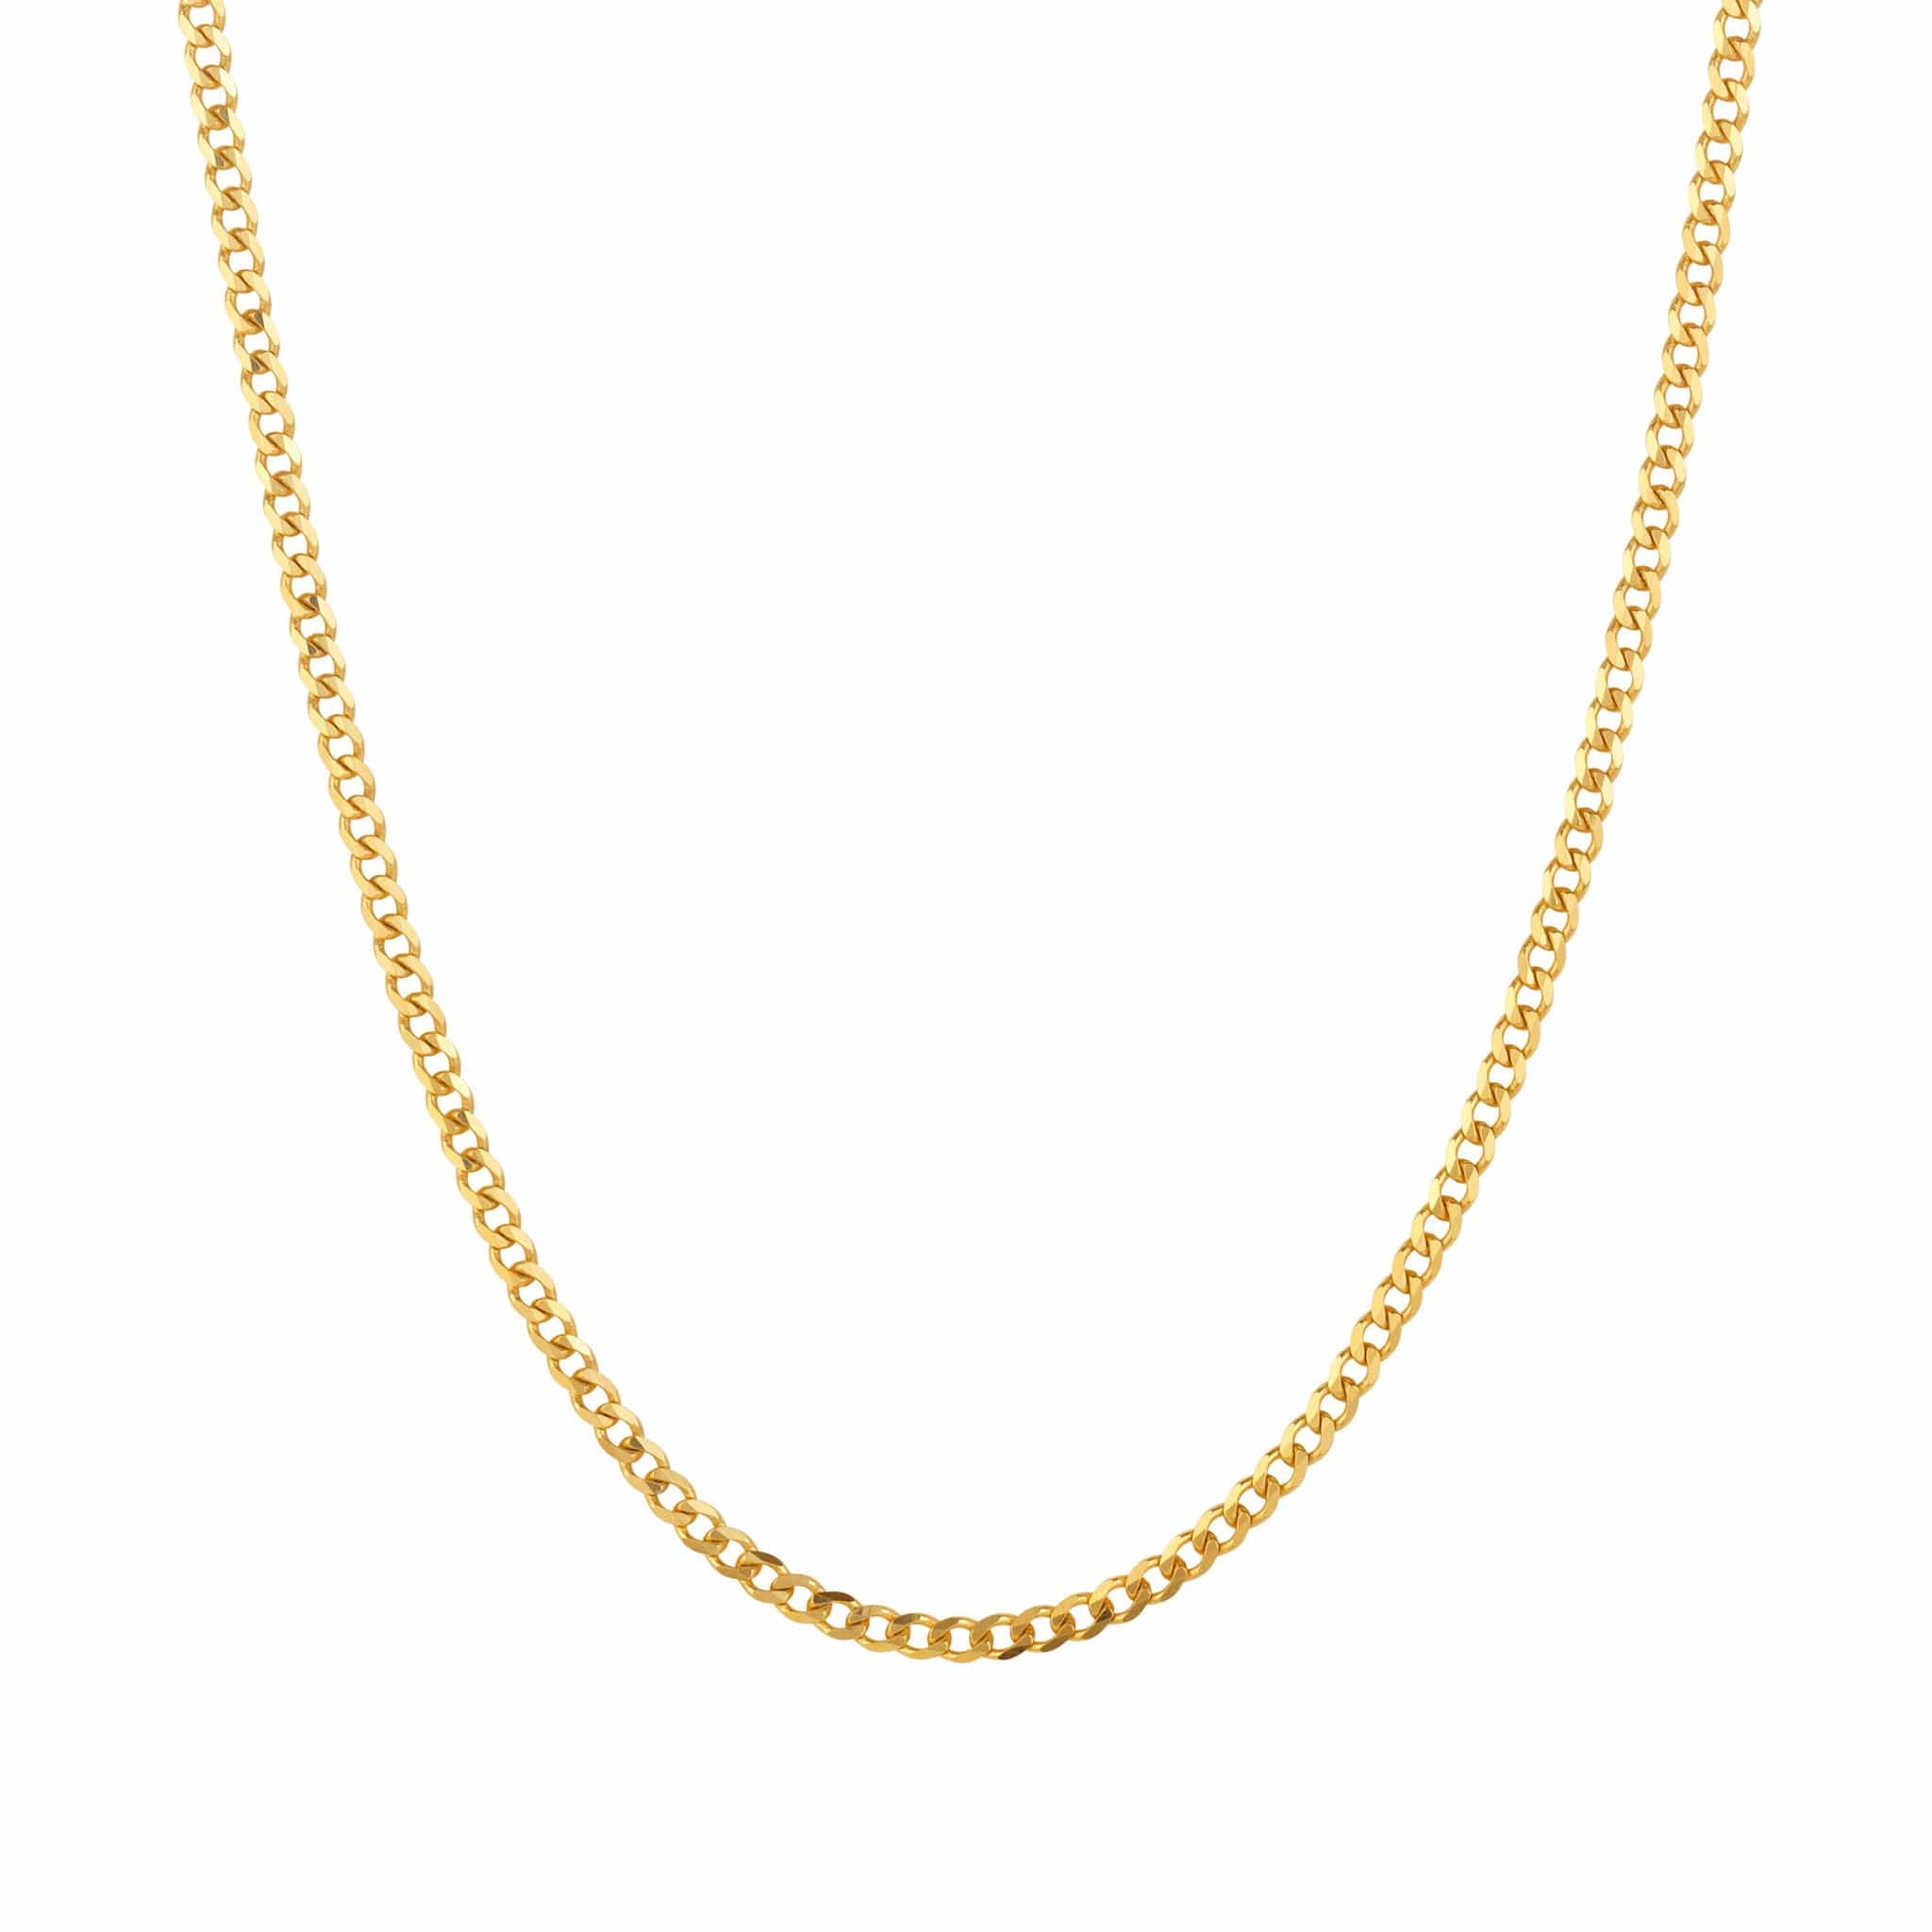 A thin curb chain necklace in polished gold, laid out against a plain background.